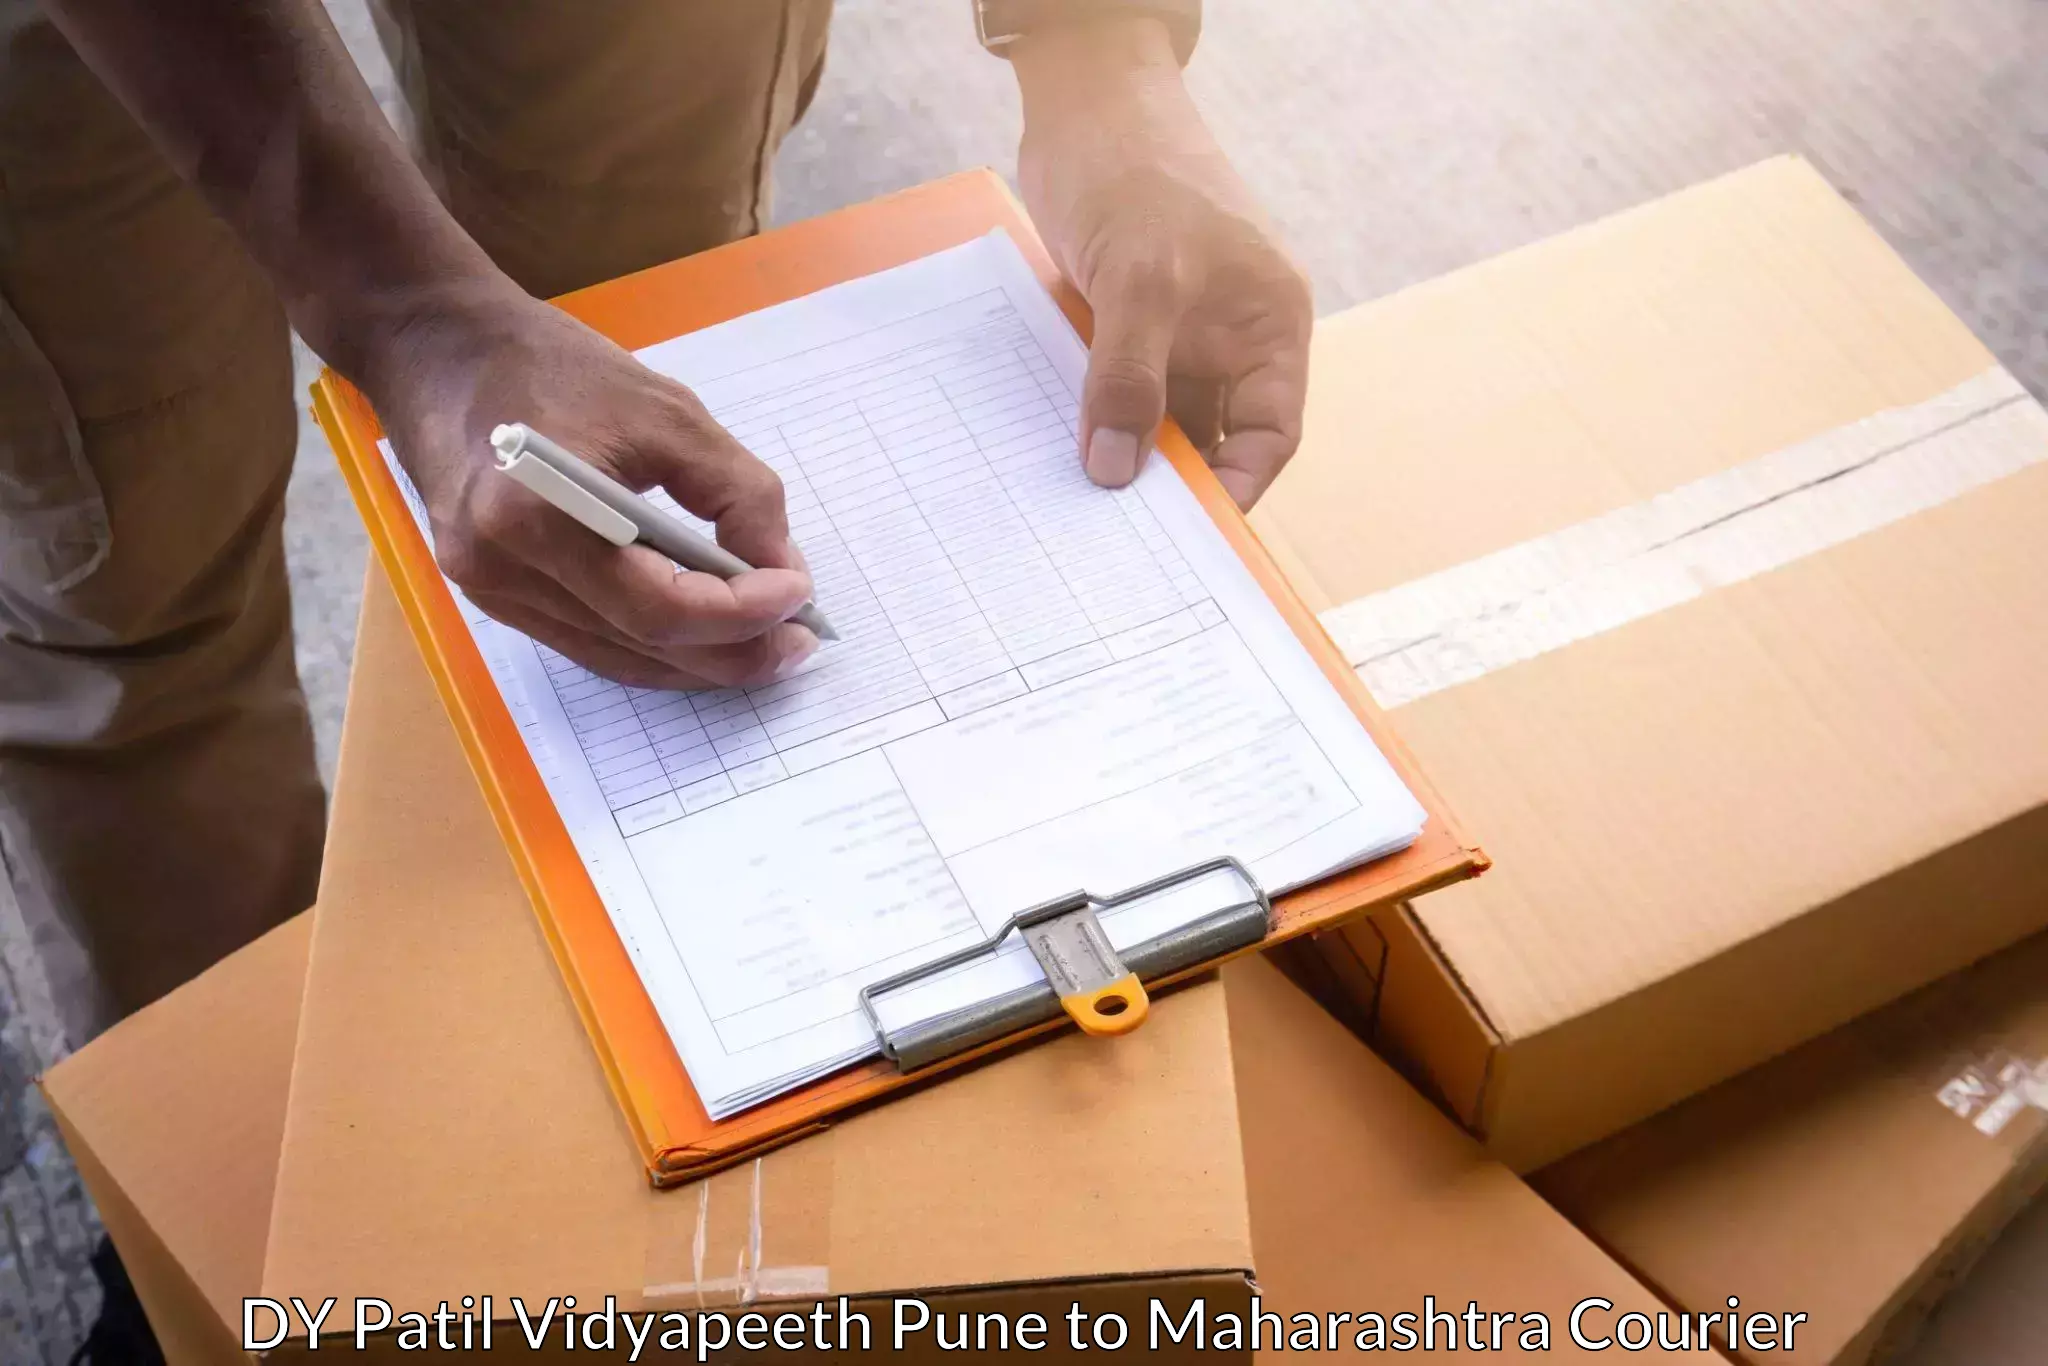 On-demand delivery DY Patil Vidyapeeth Pune to Raigarh Maharashtra